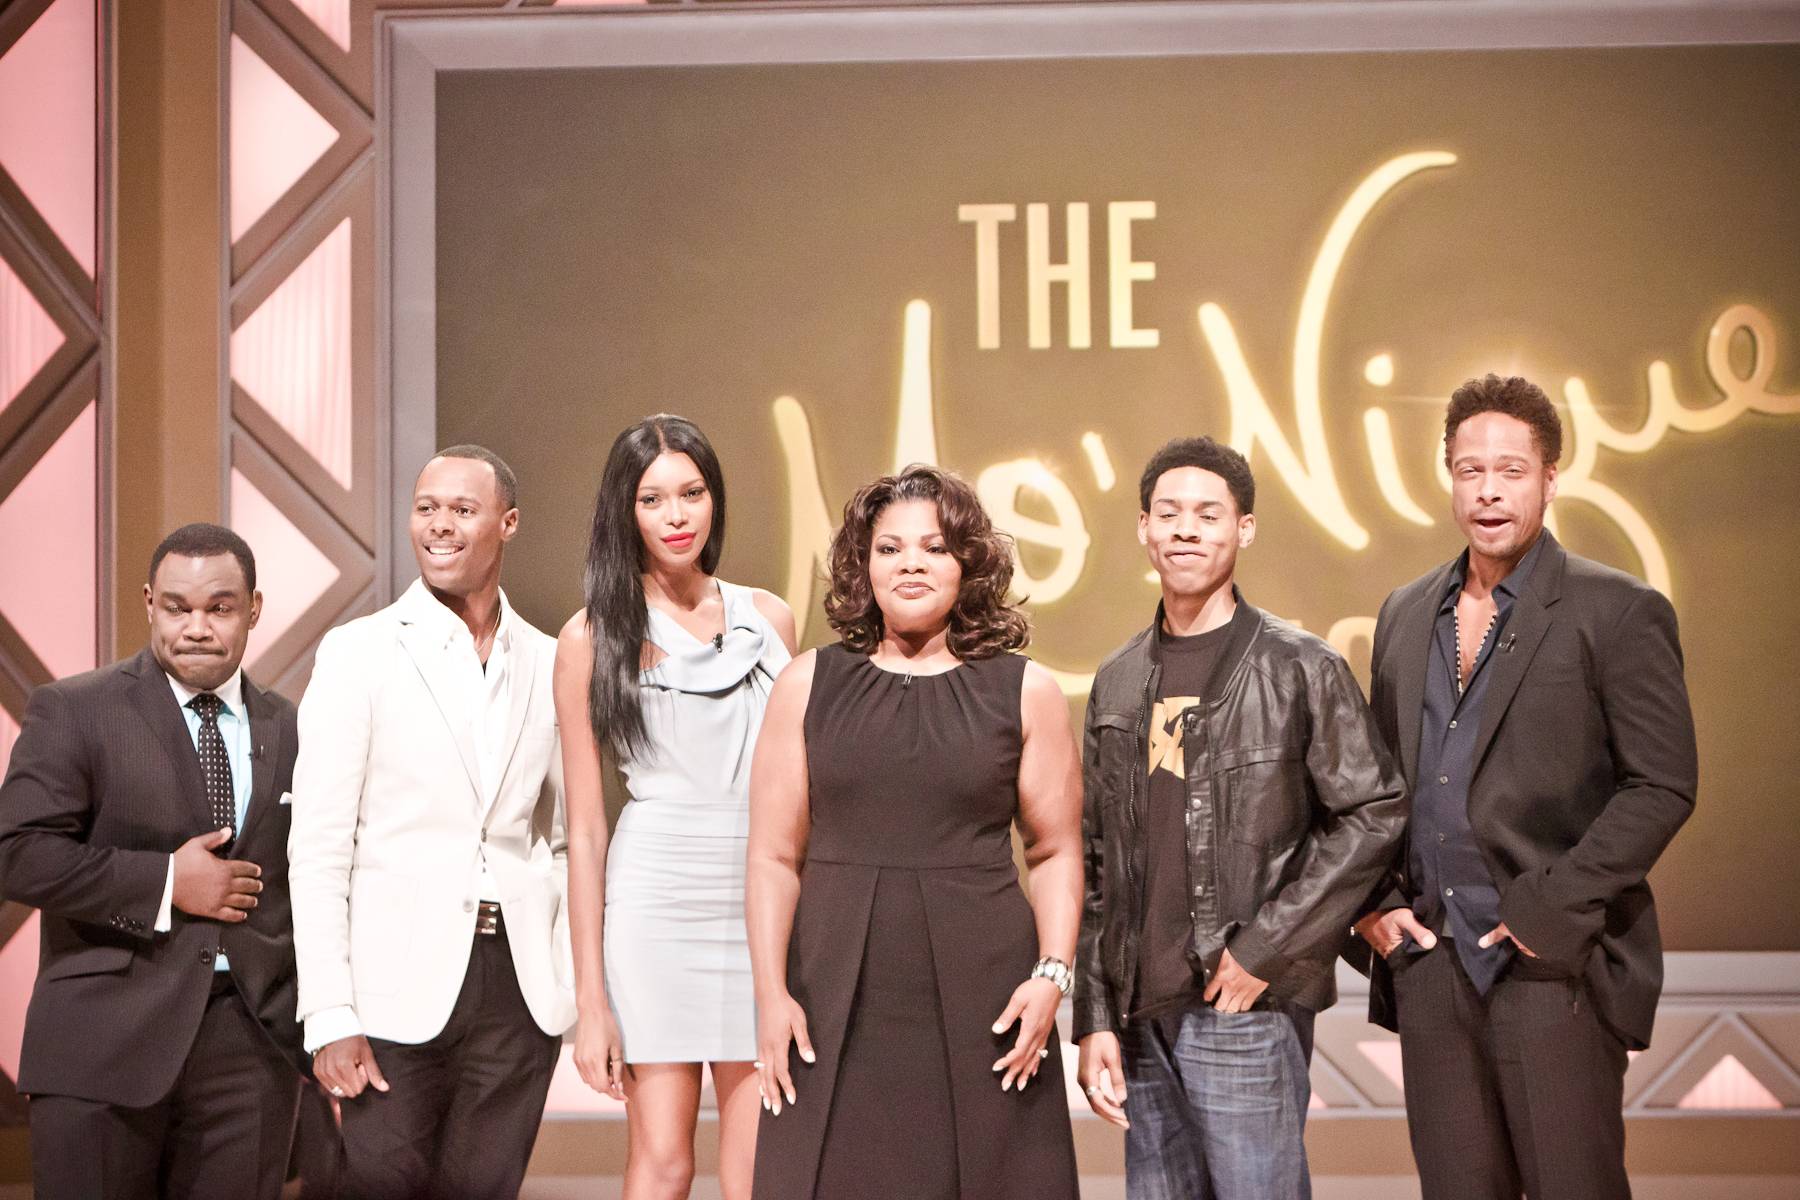 Another Great Episode Comes to a Close - From left: Rodney Perry, Micah Stampley, Jessica White, Mo'Nique, Alphonso McAuley and Gary Dourdan.&nbsp;(Photo: Darnell Williams/BET)